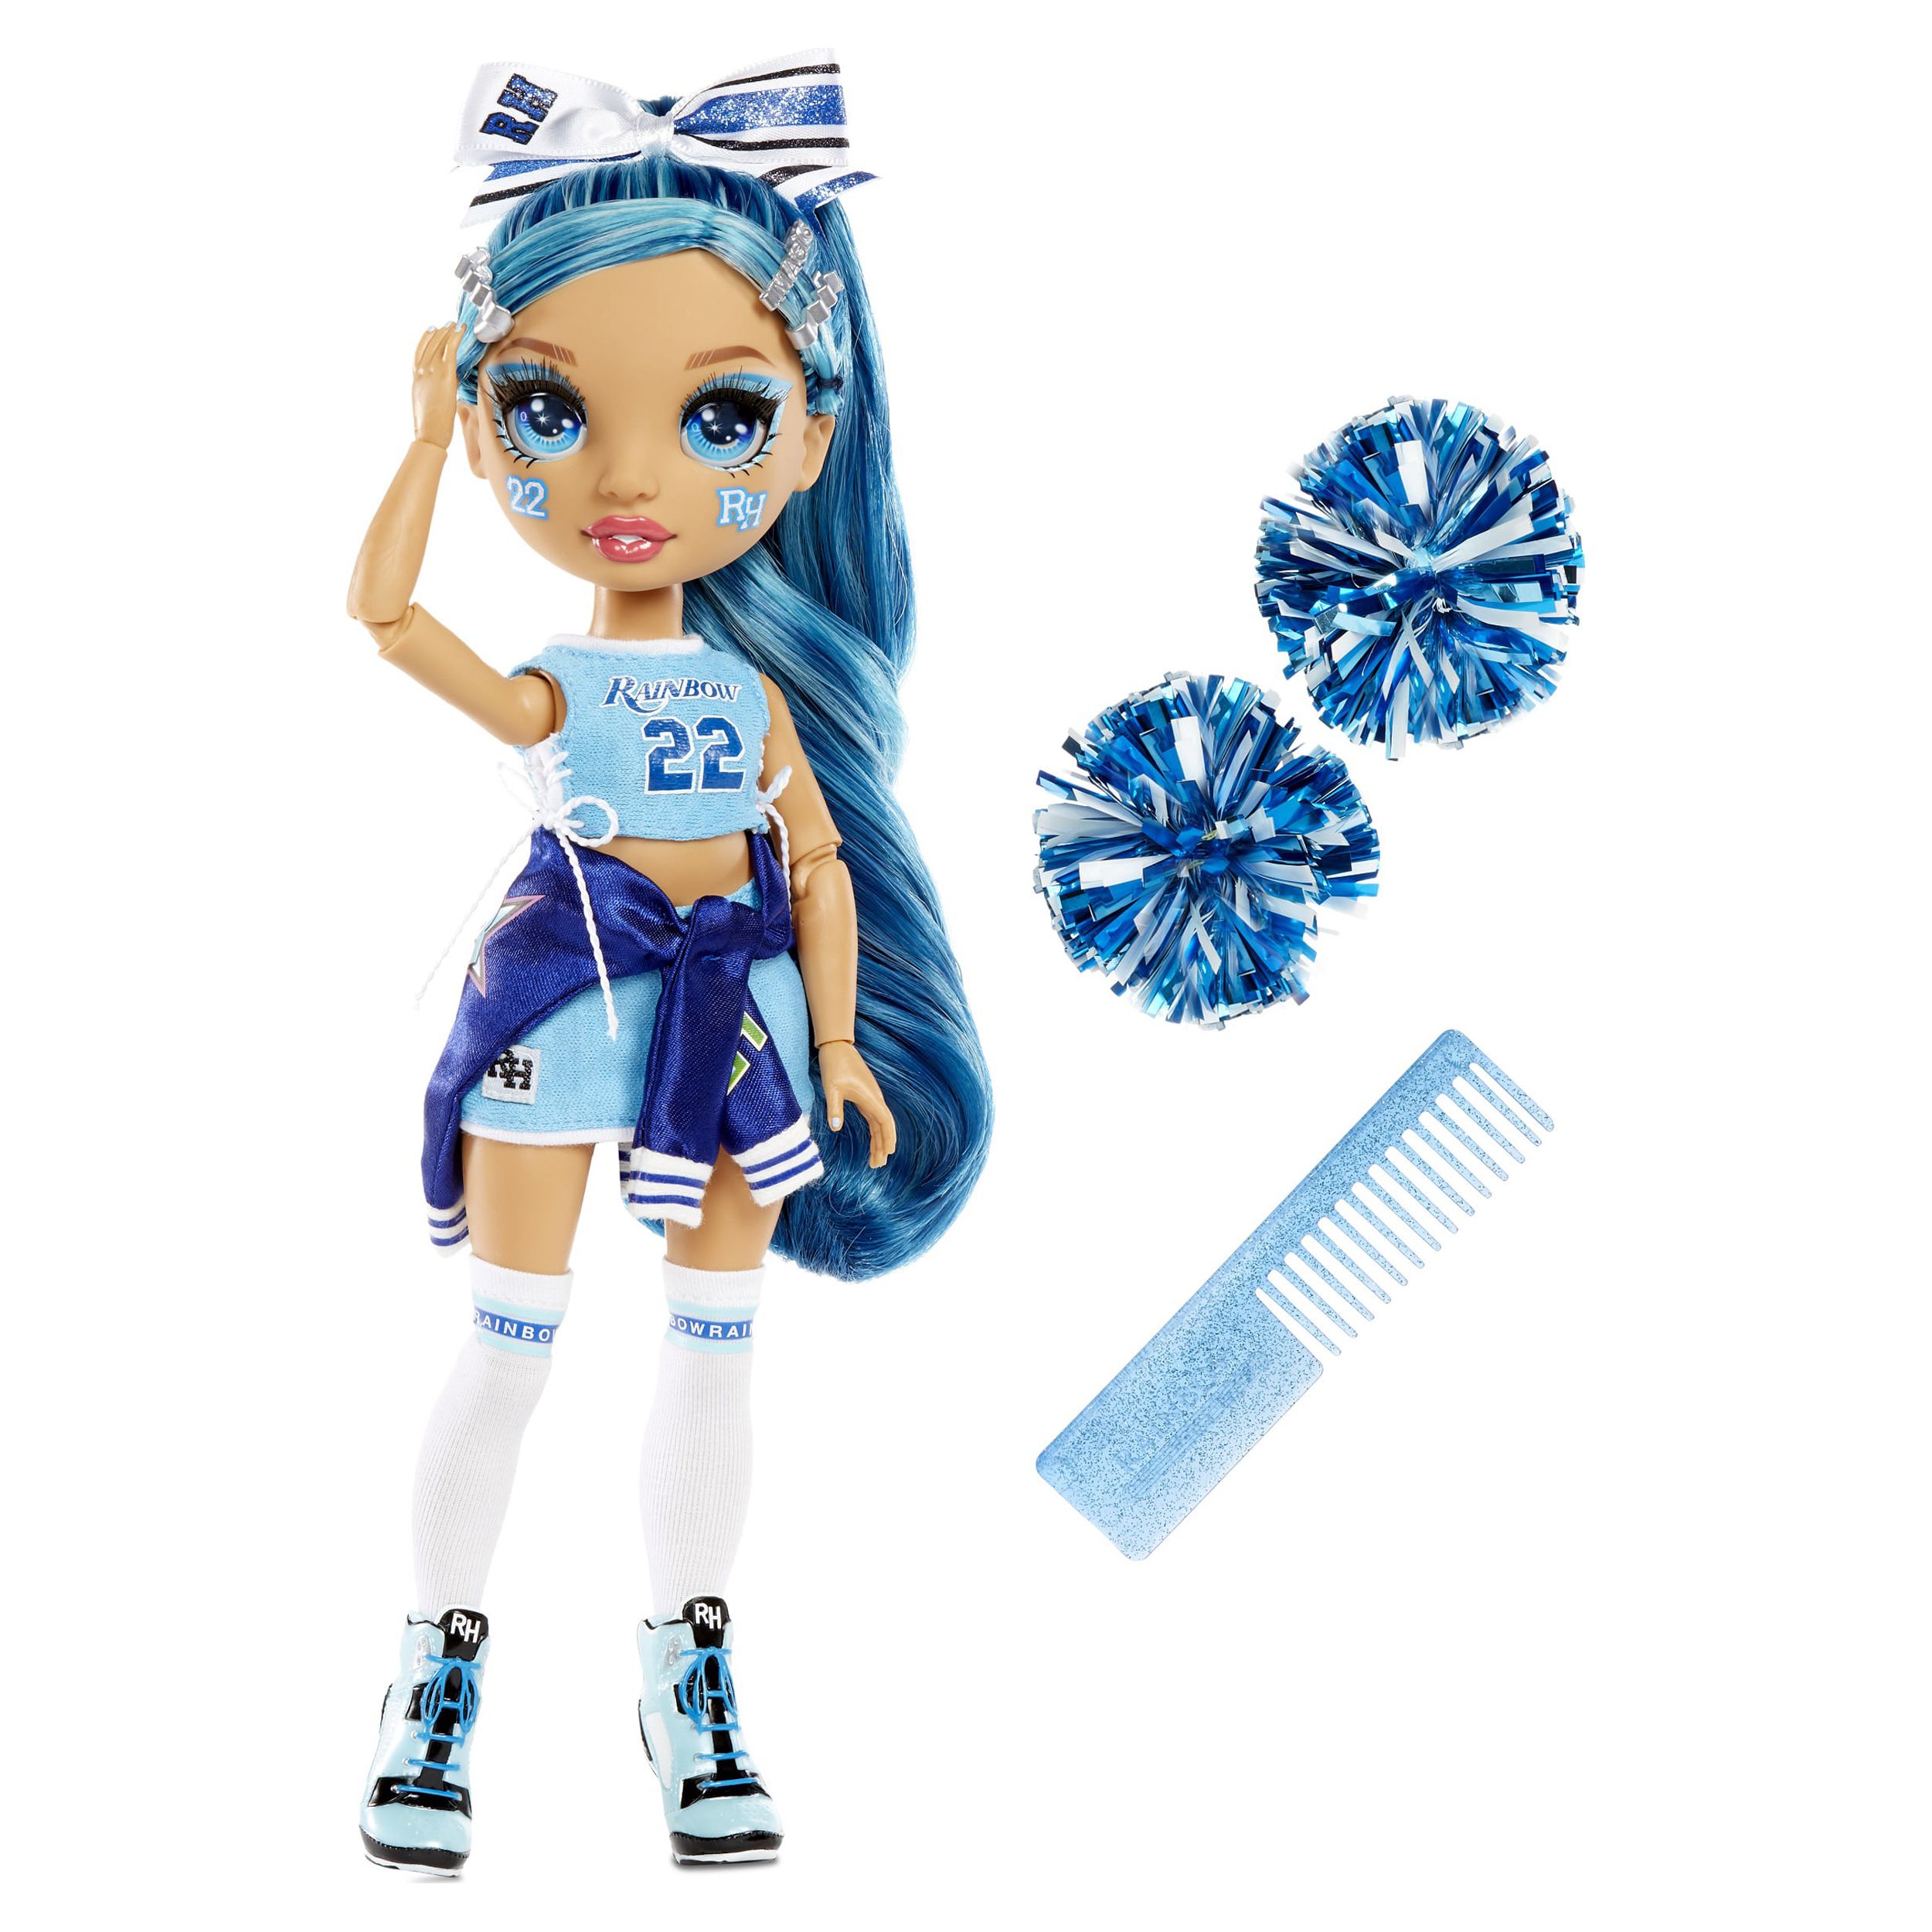 Rainbow High Cheer Skyler Bradshaw – Blue Fashion Doll with Pom Poms, Cheerleader Doll, Toys for Kids 6-12 Years Old - image 4 of 8